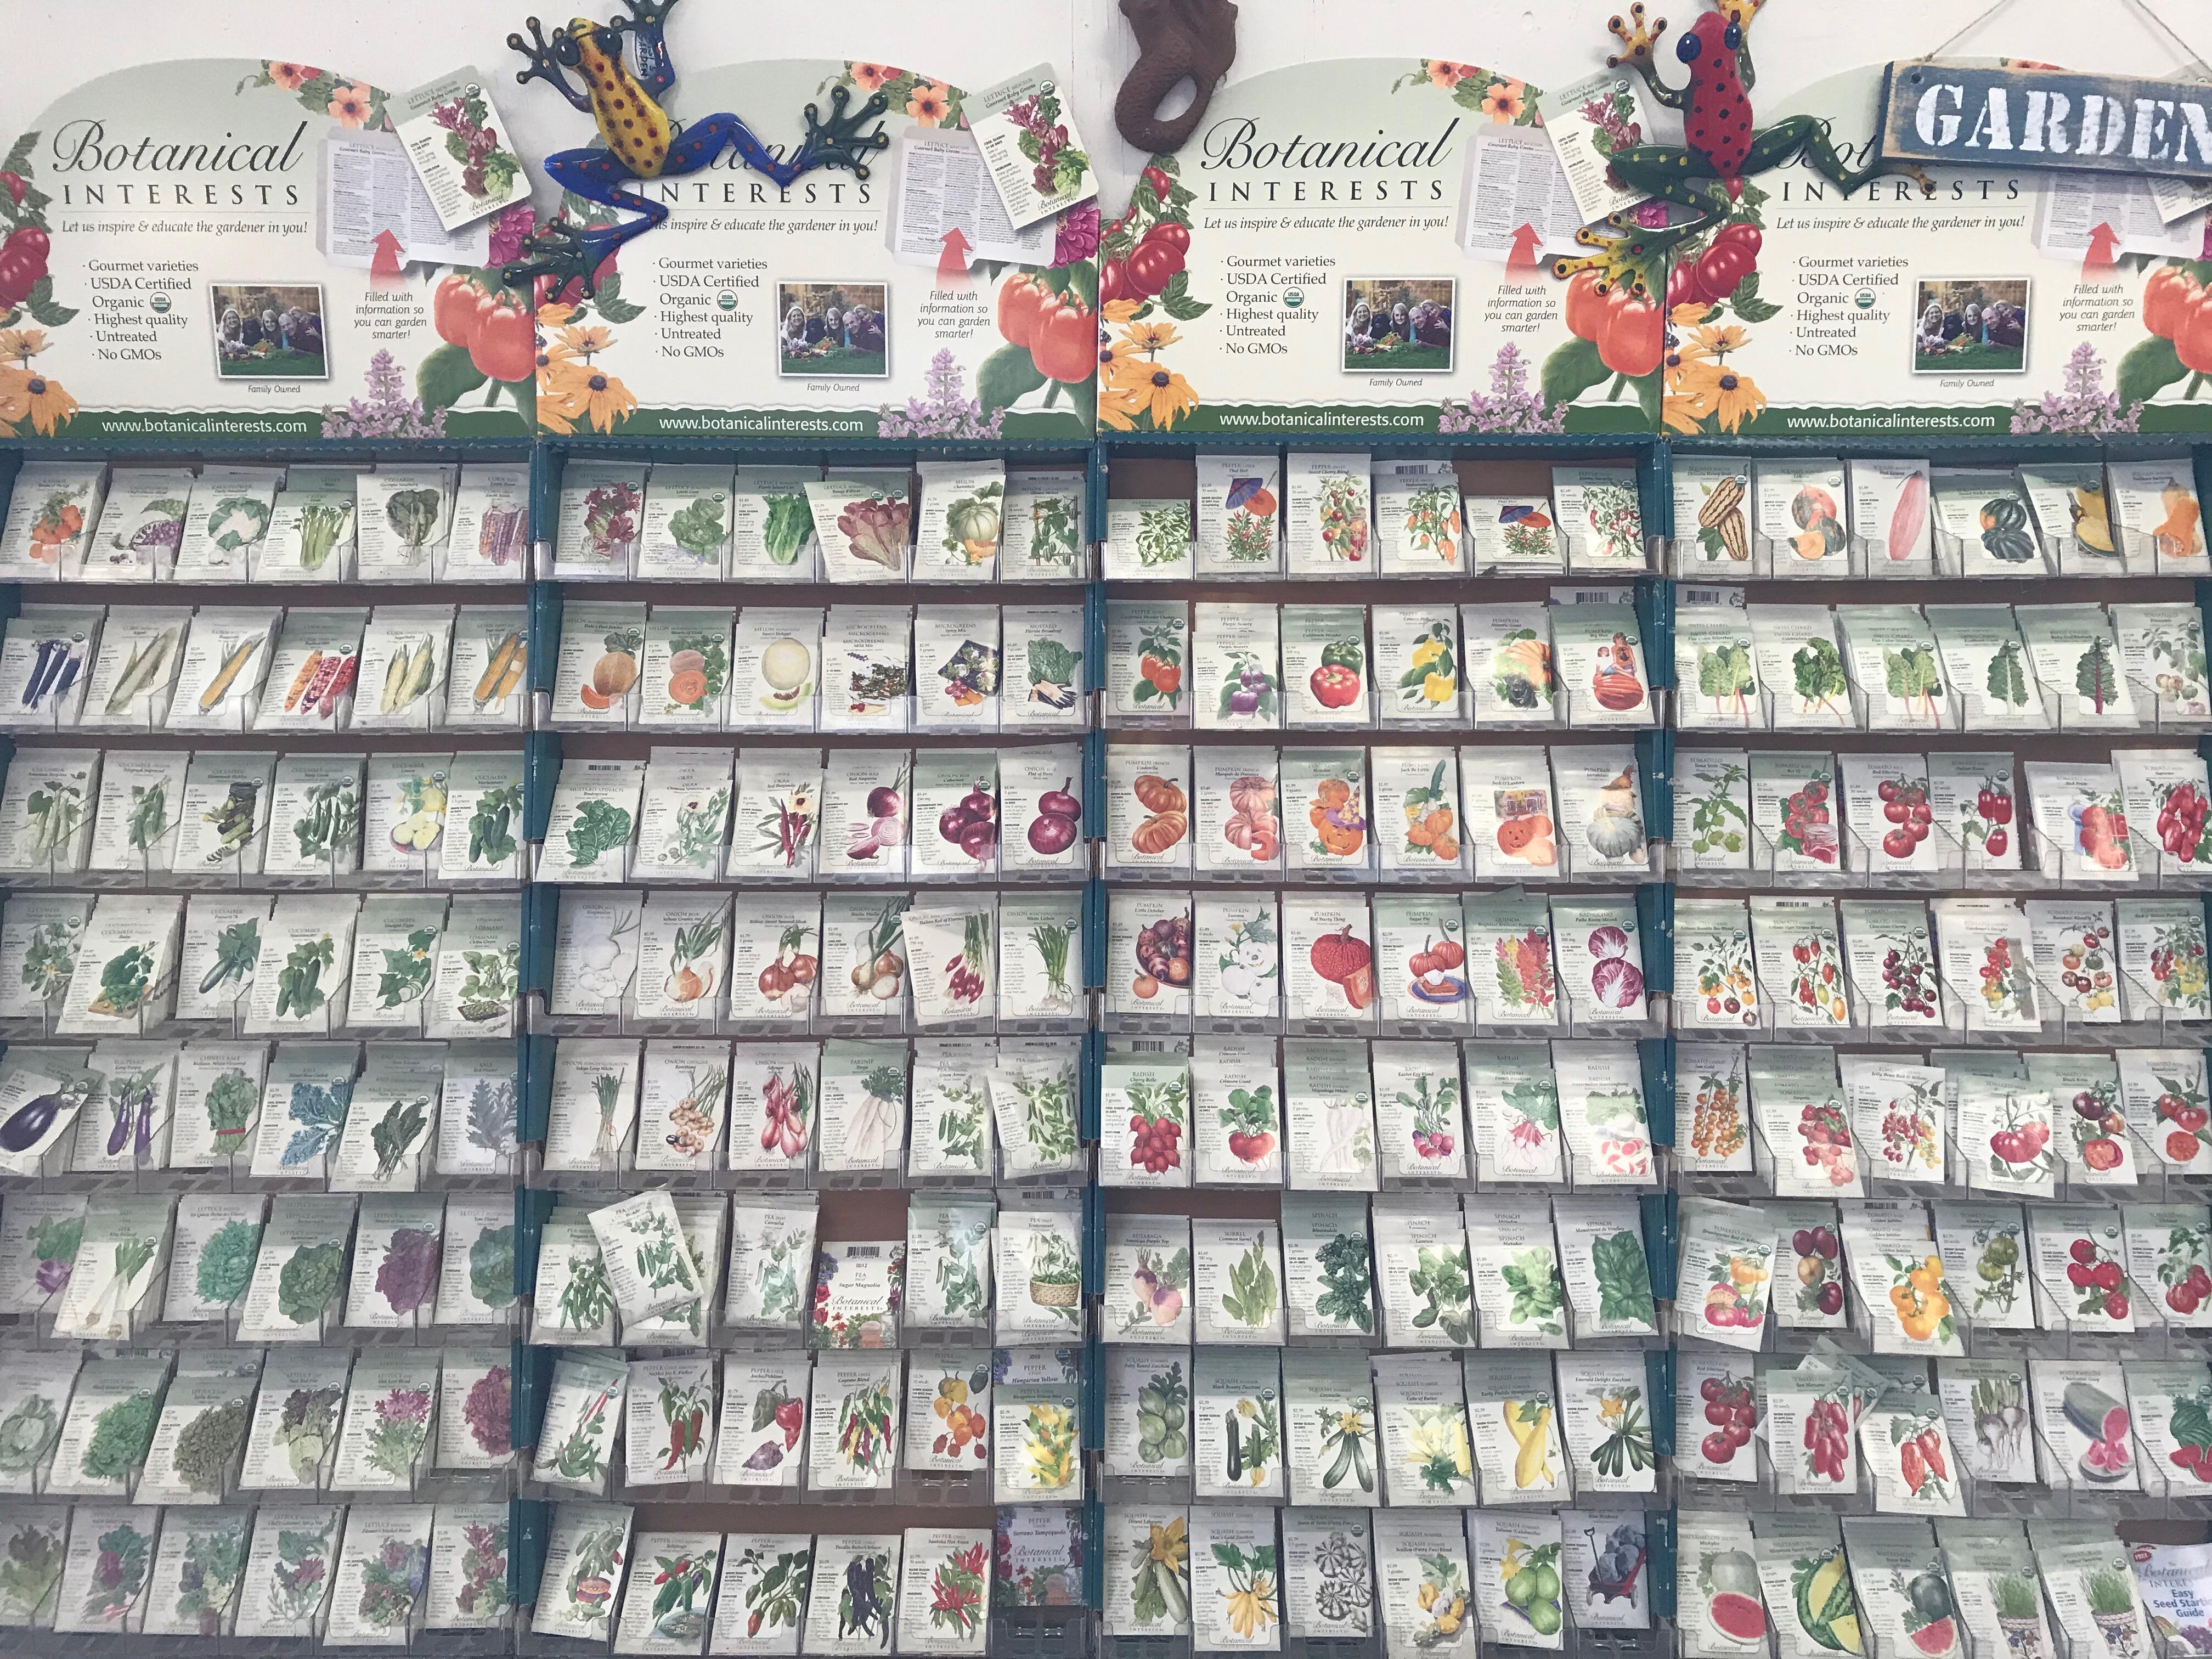 Quality plants, seeds and more at our local garden center and nursery.